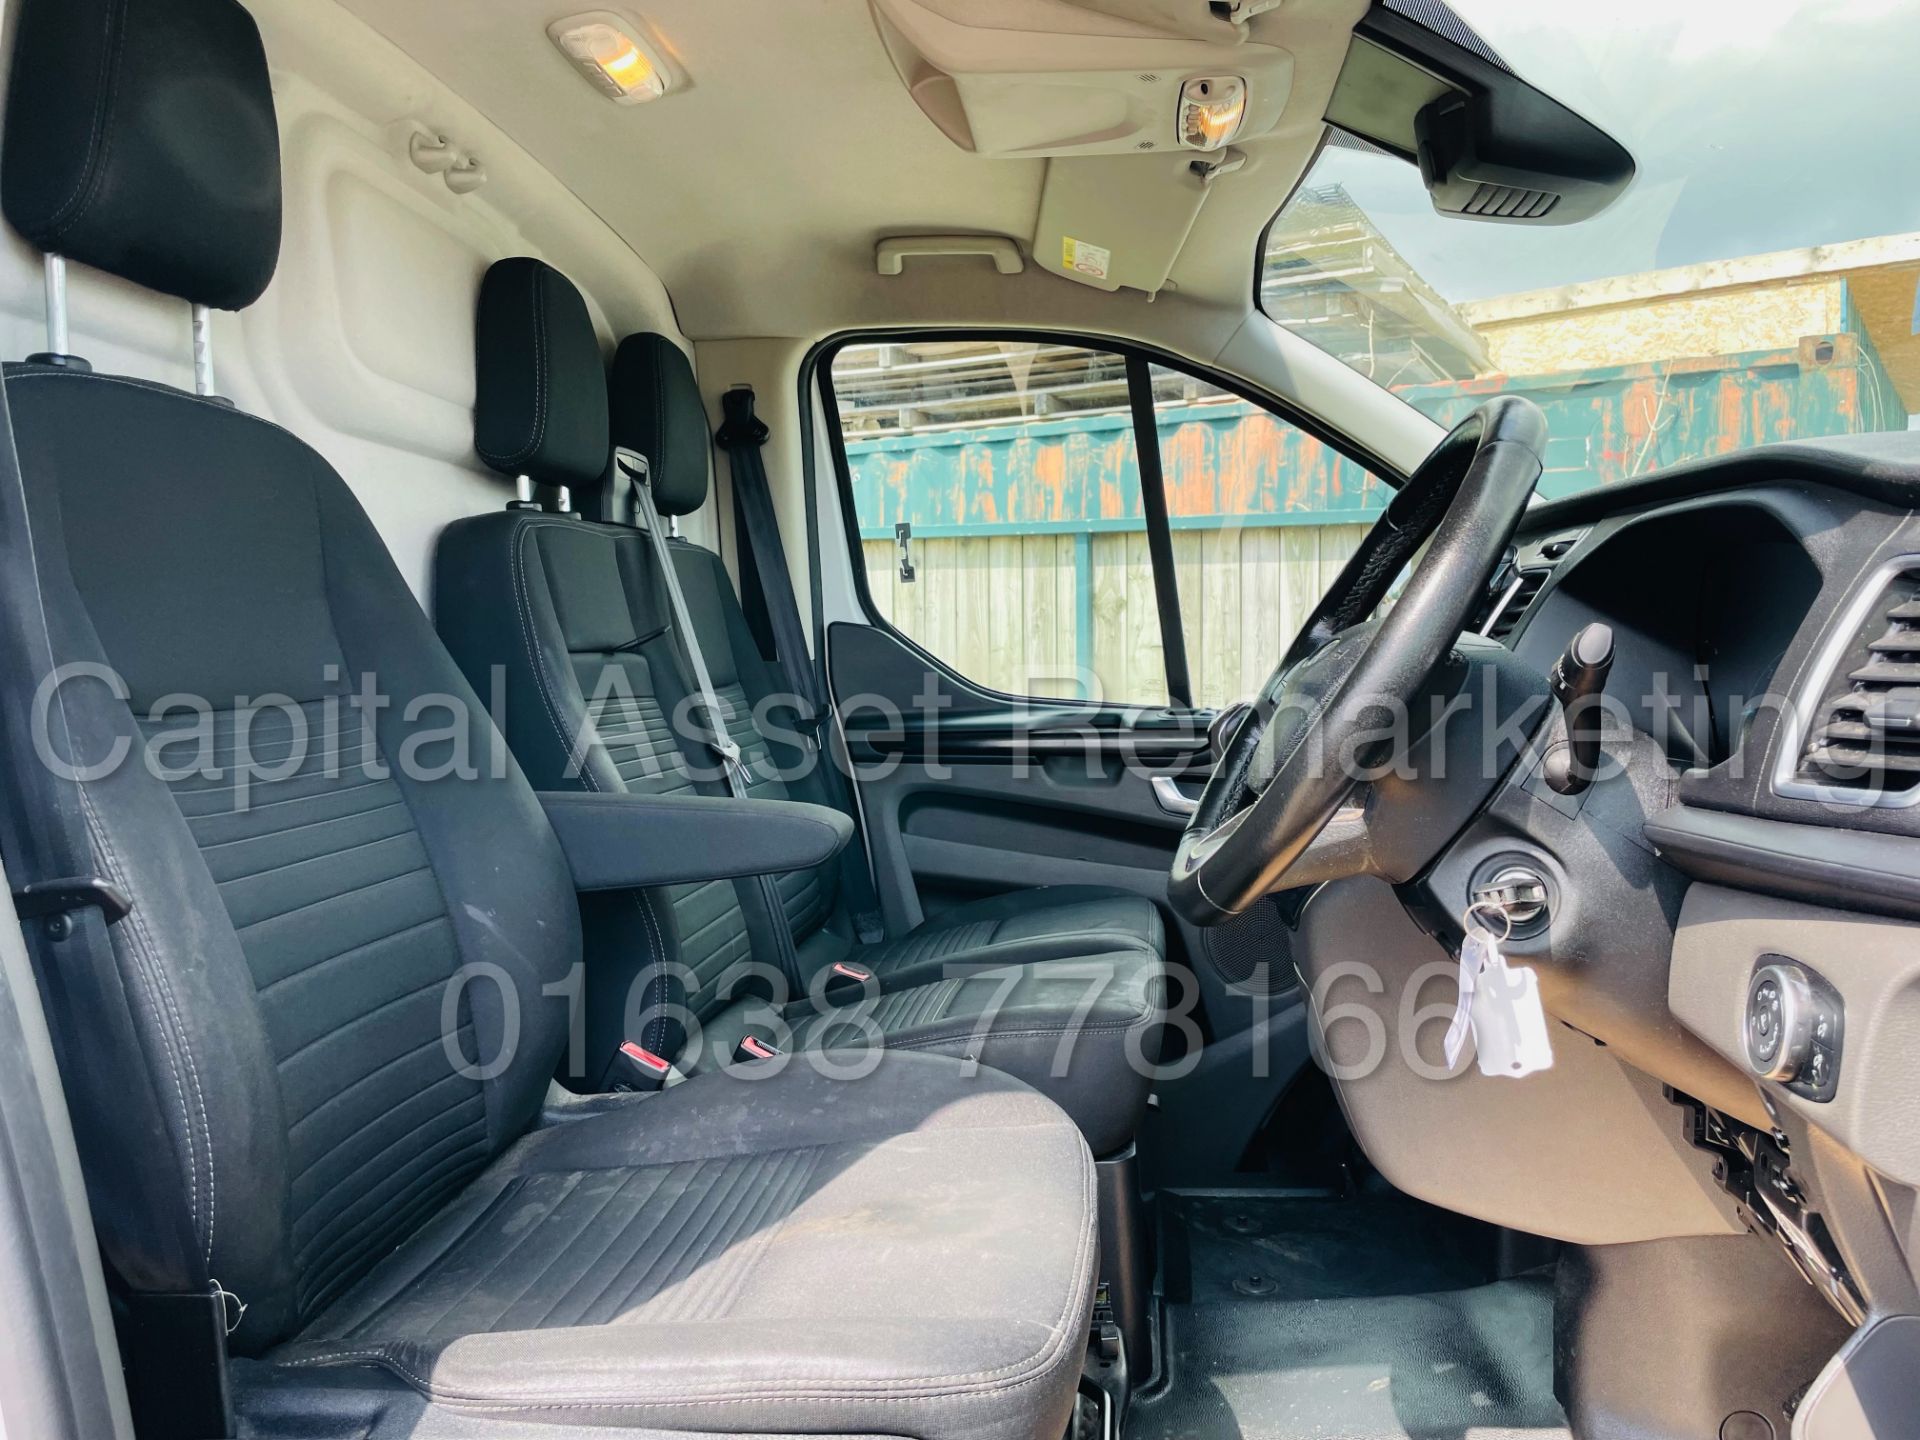 FORD TRANSIT CUSTOM *LIMITED EDITION* PANEL VAN (2018 - NEW MODEL) '2.0 TDCI - EURO 6 - 6 SPEED' - Image 31 of 46